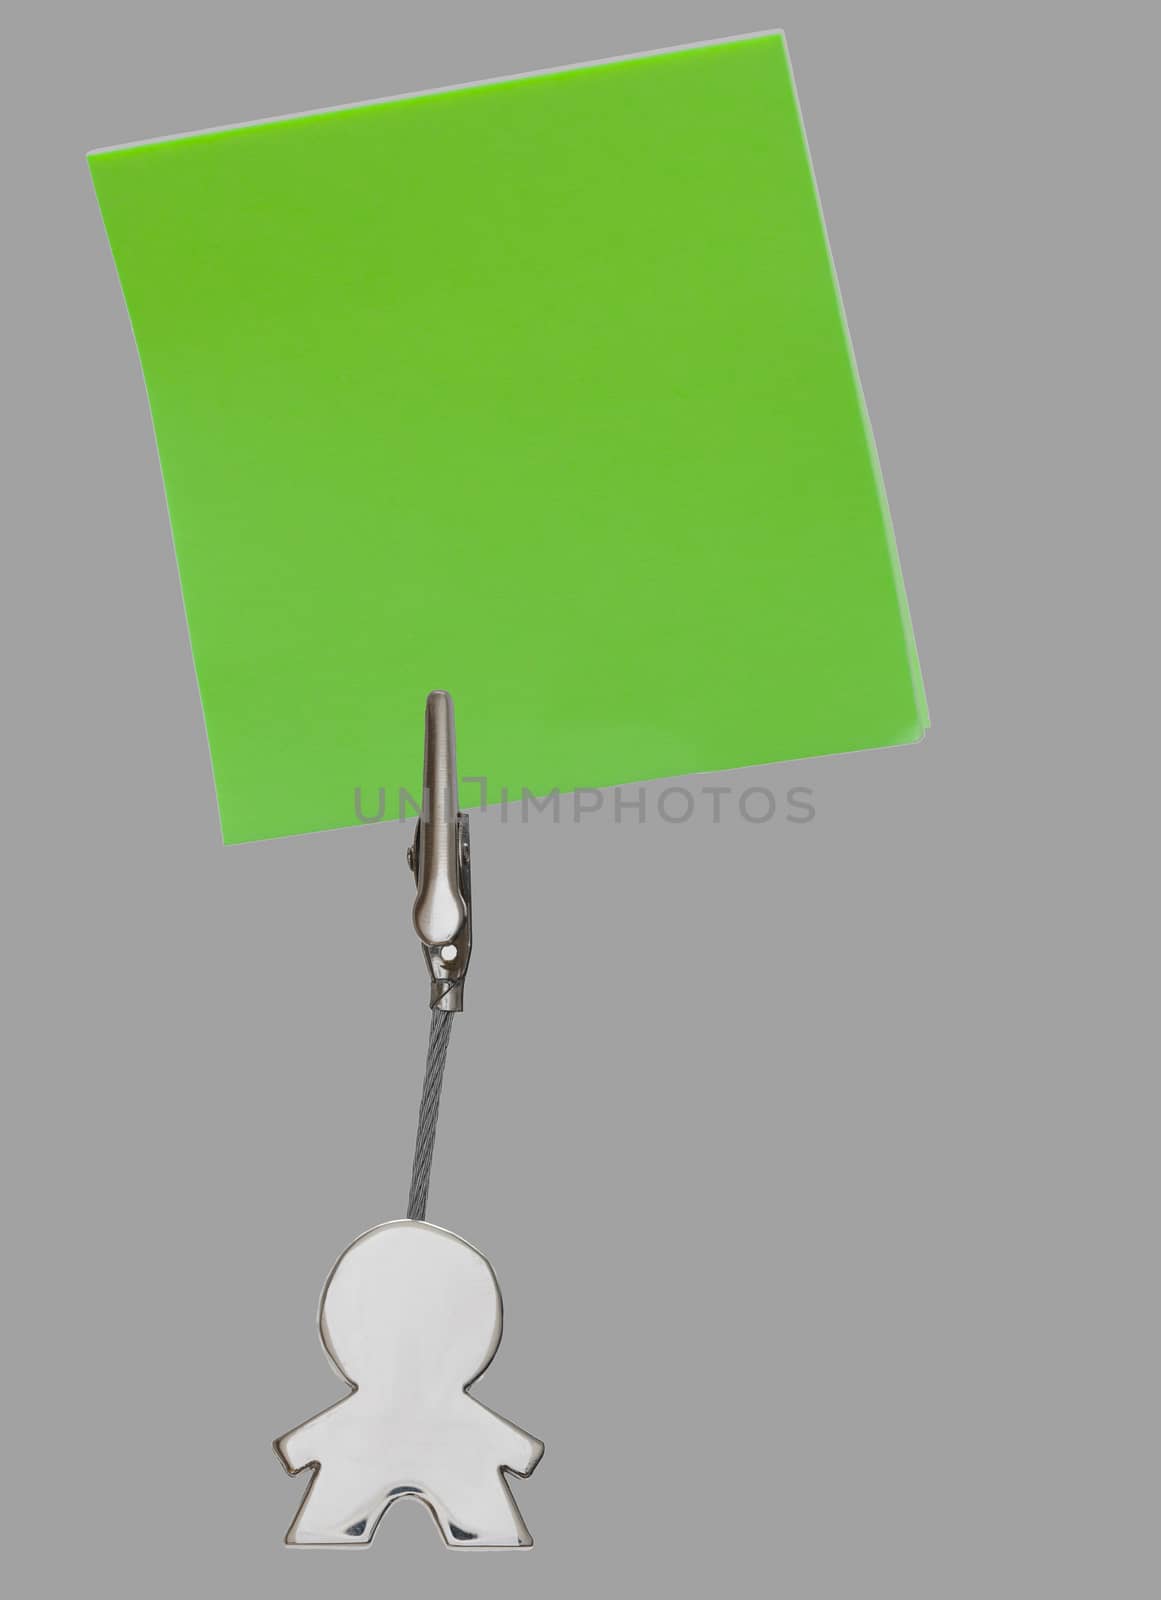 Post it Note holder - green